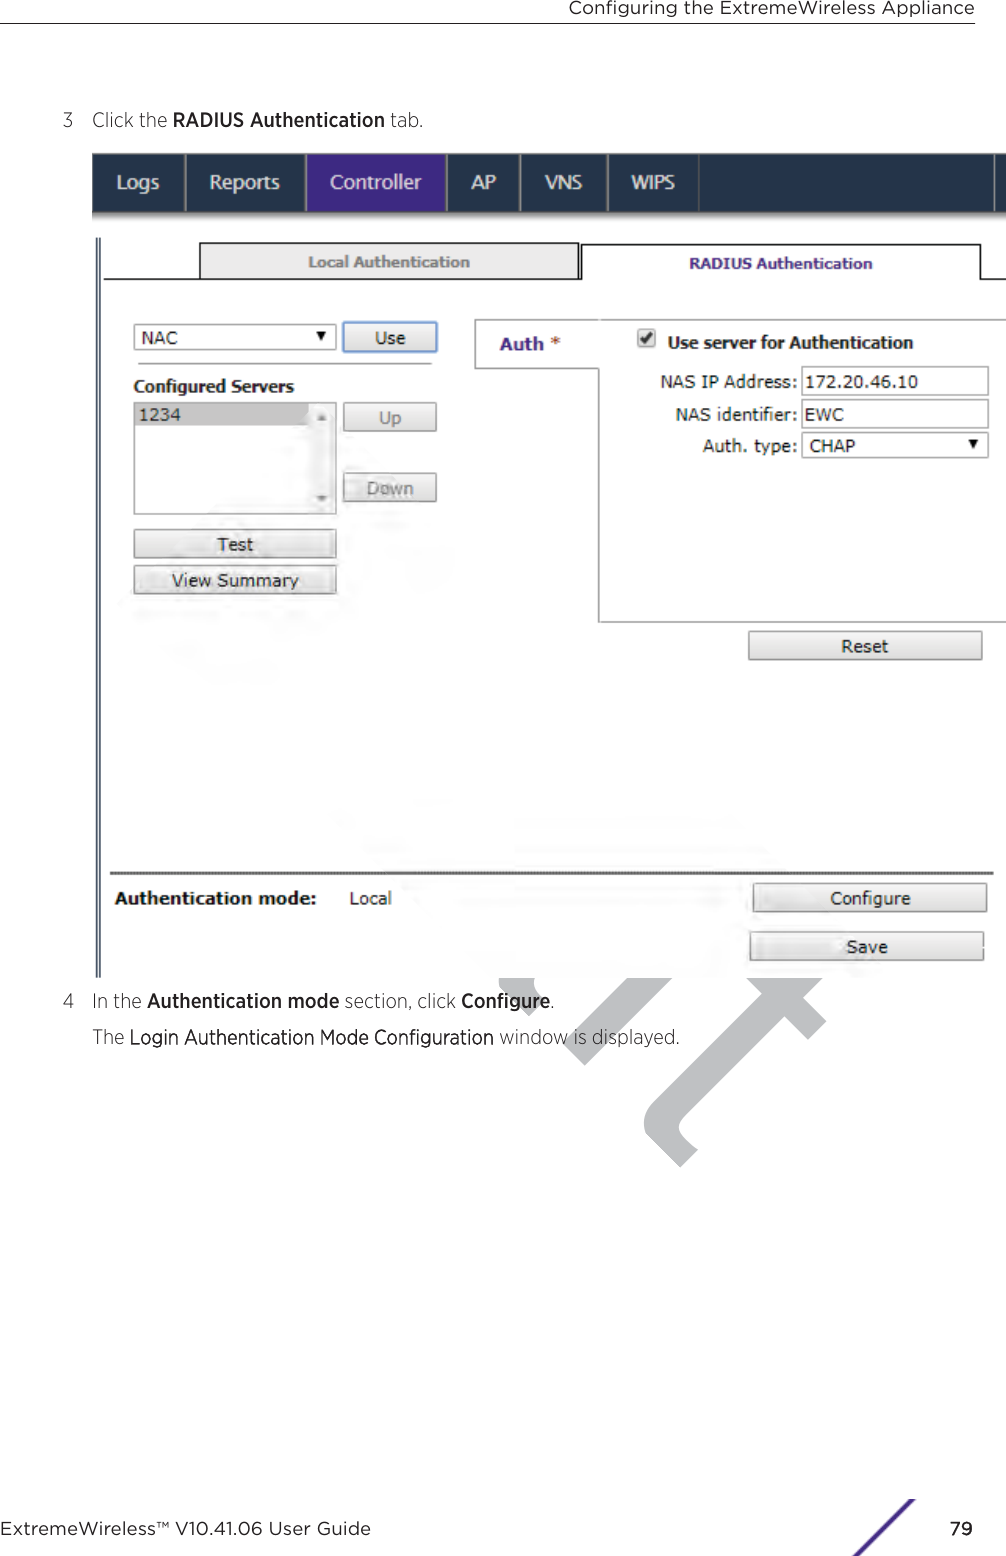 aft3 Click the RADIUS Authentication tab.4 In the Authentication mode section, click Conﬁgure.The LLogin Authentication Mode Conﬁguration window is displayed.Conﬁguring the ExtremeWireless ApplianceExtremeWireless™ V10.41.06 User Guide79